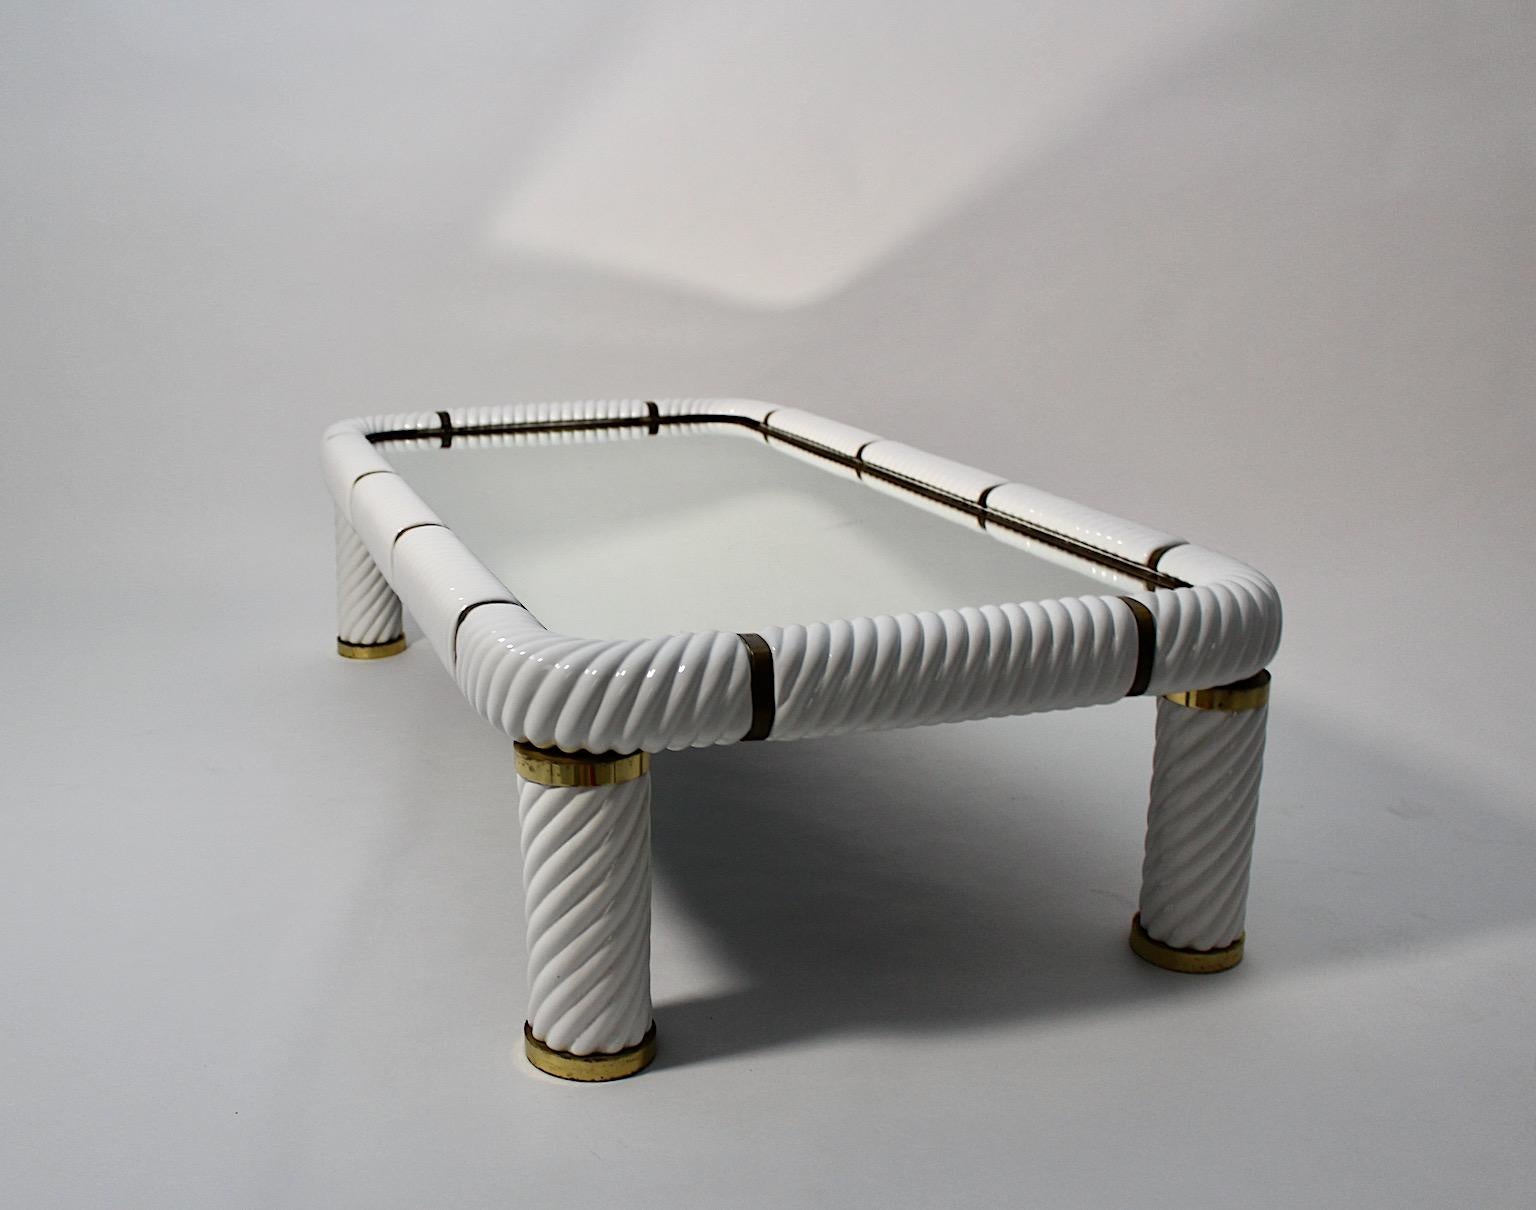 Italian Modern vintage sofa table or coffee table from white ceramic and solid brass by Tommaso Barbi 1970s Italy.
A sophisticated handmade and high quality sofa table by Tommaso Barbi 1970s Italy from white curled glazed glossy ceramic and solid